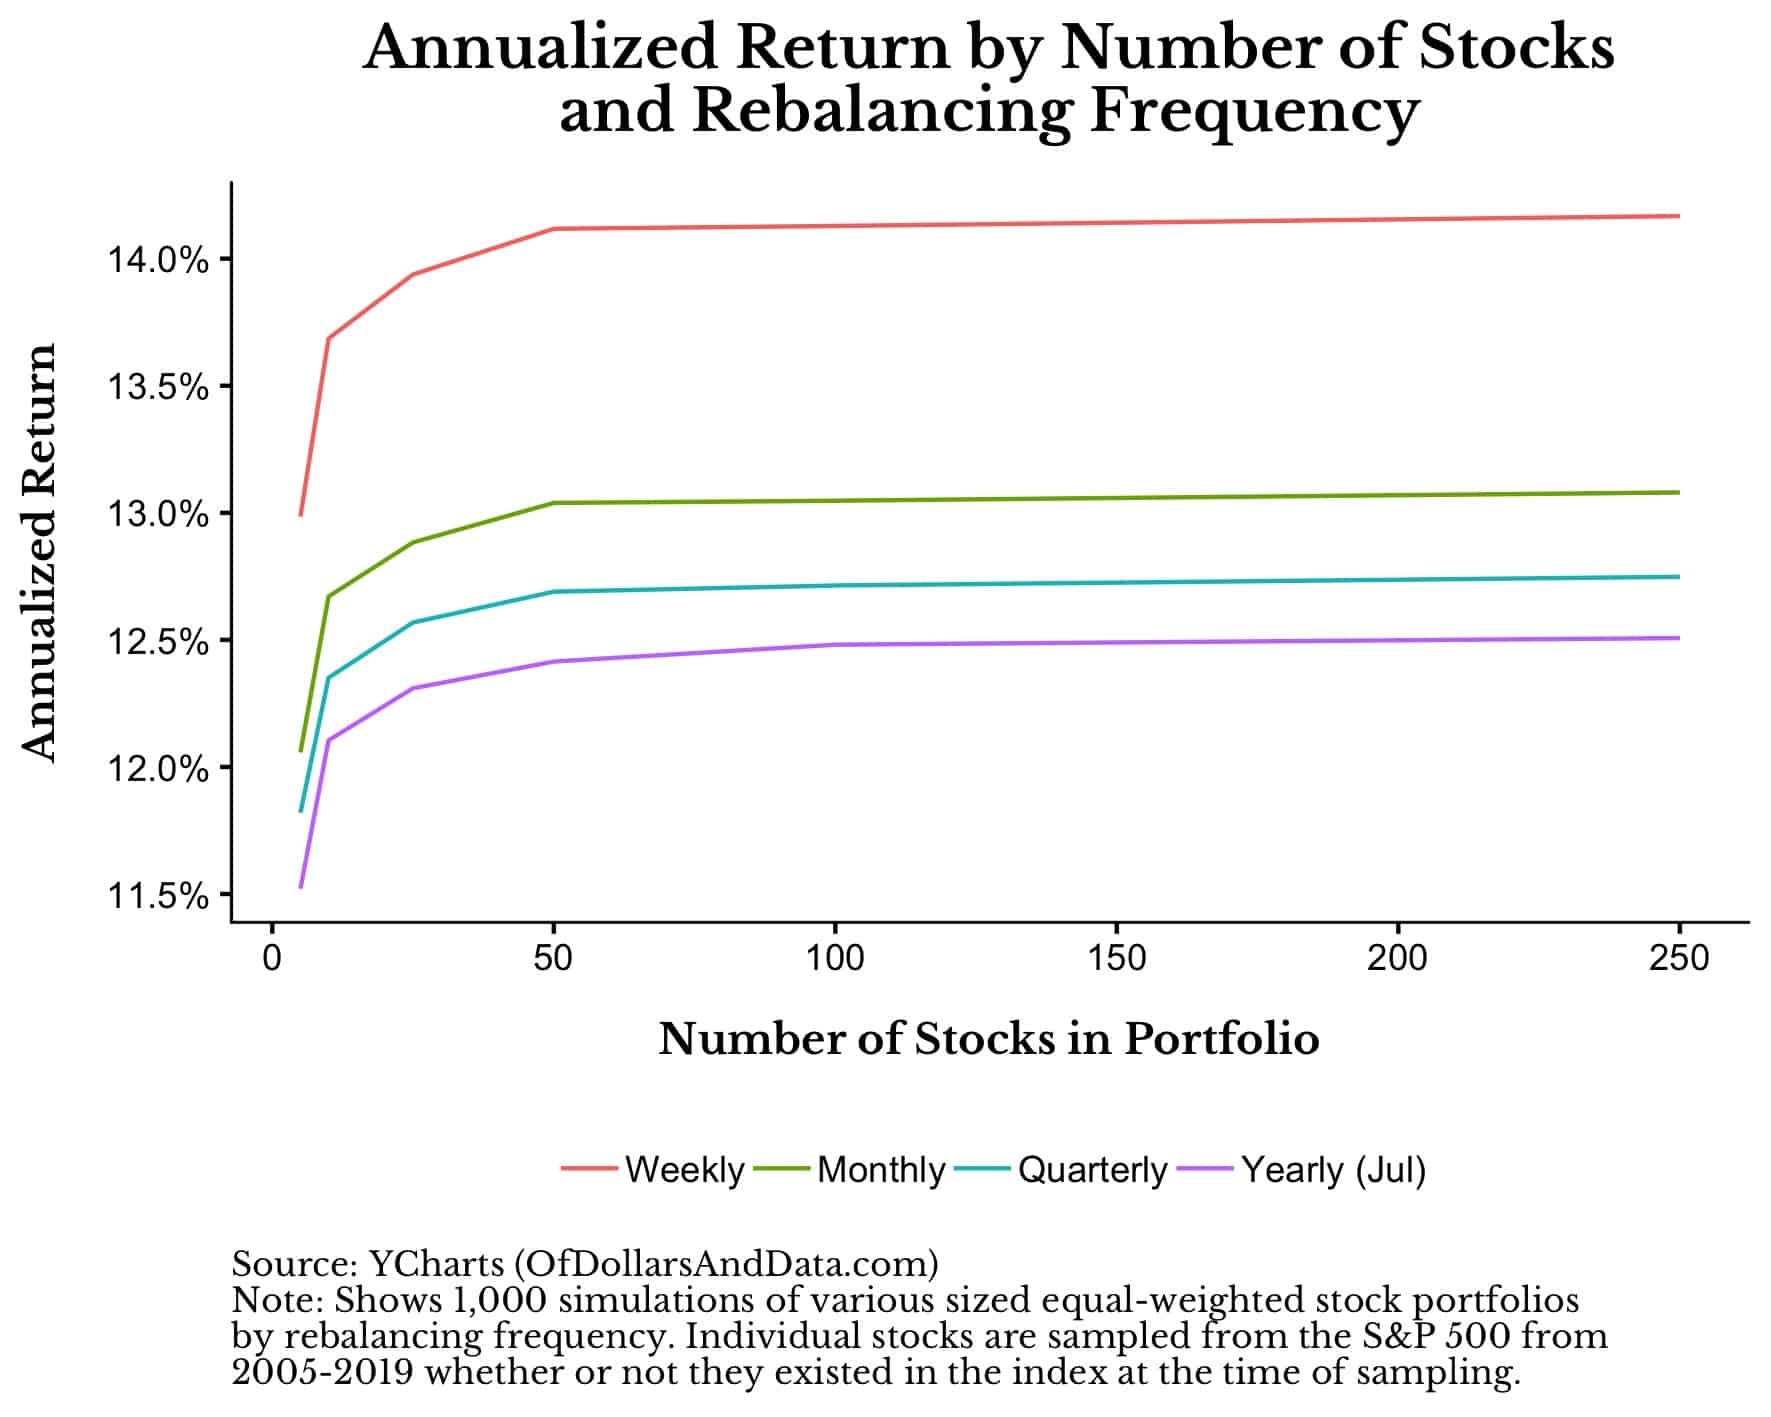 Annualized return by number of stocks and rebalancing frequency